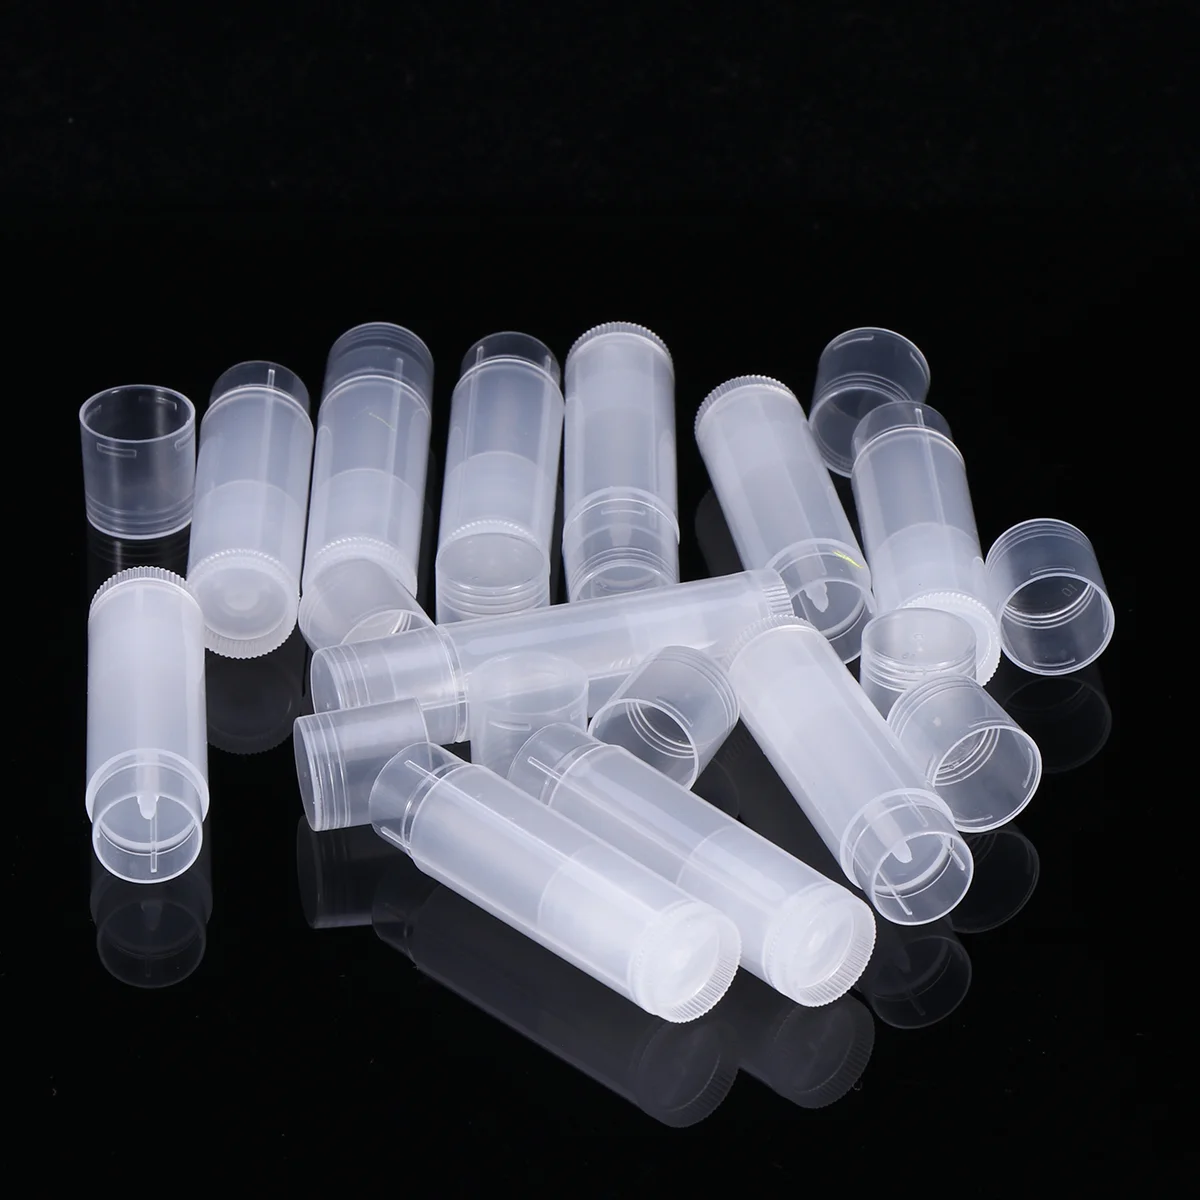 

25pcs Clear Empty Lip Balm Tubes oz Lip Balm Containers Tubes with Caps for DIY Homemade Makeup